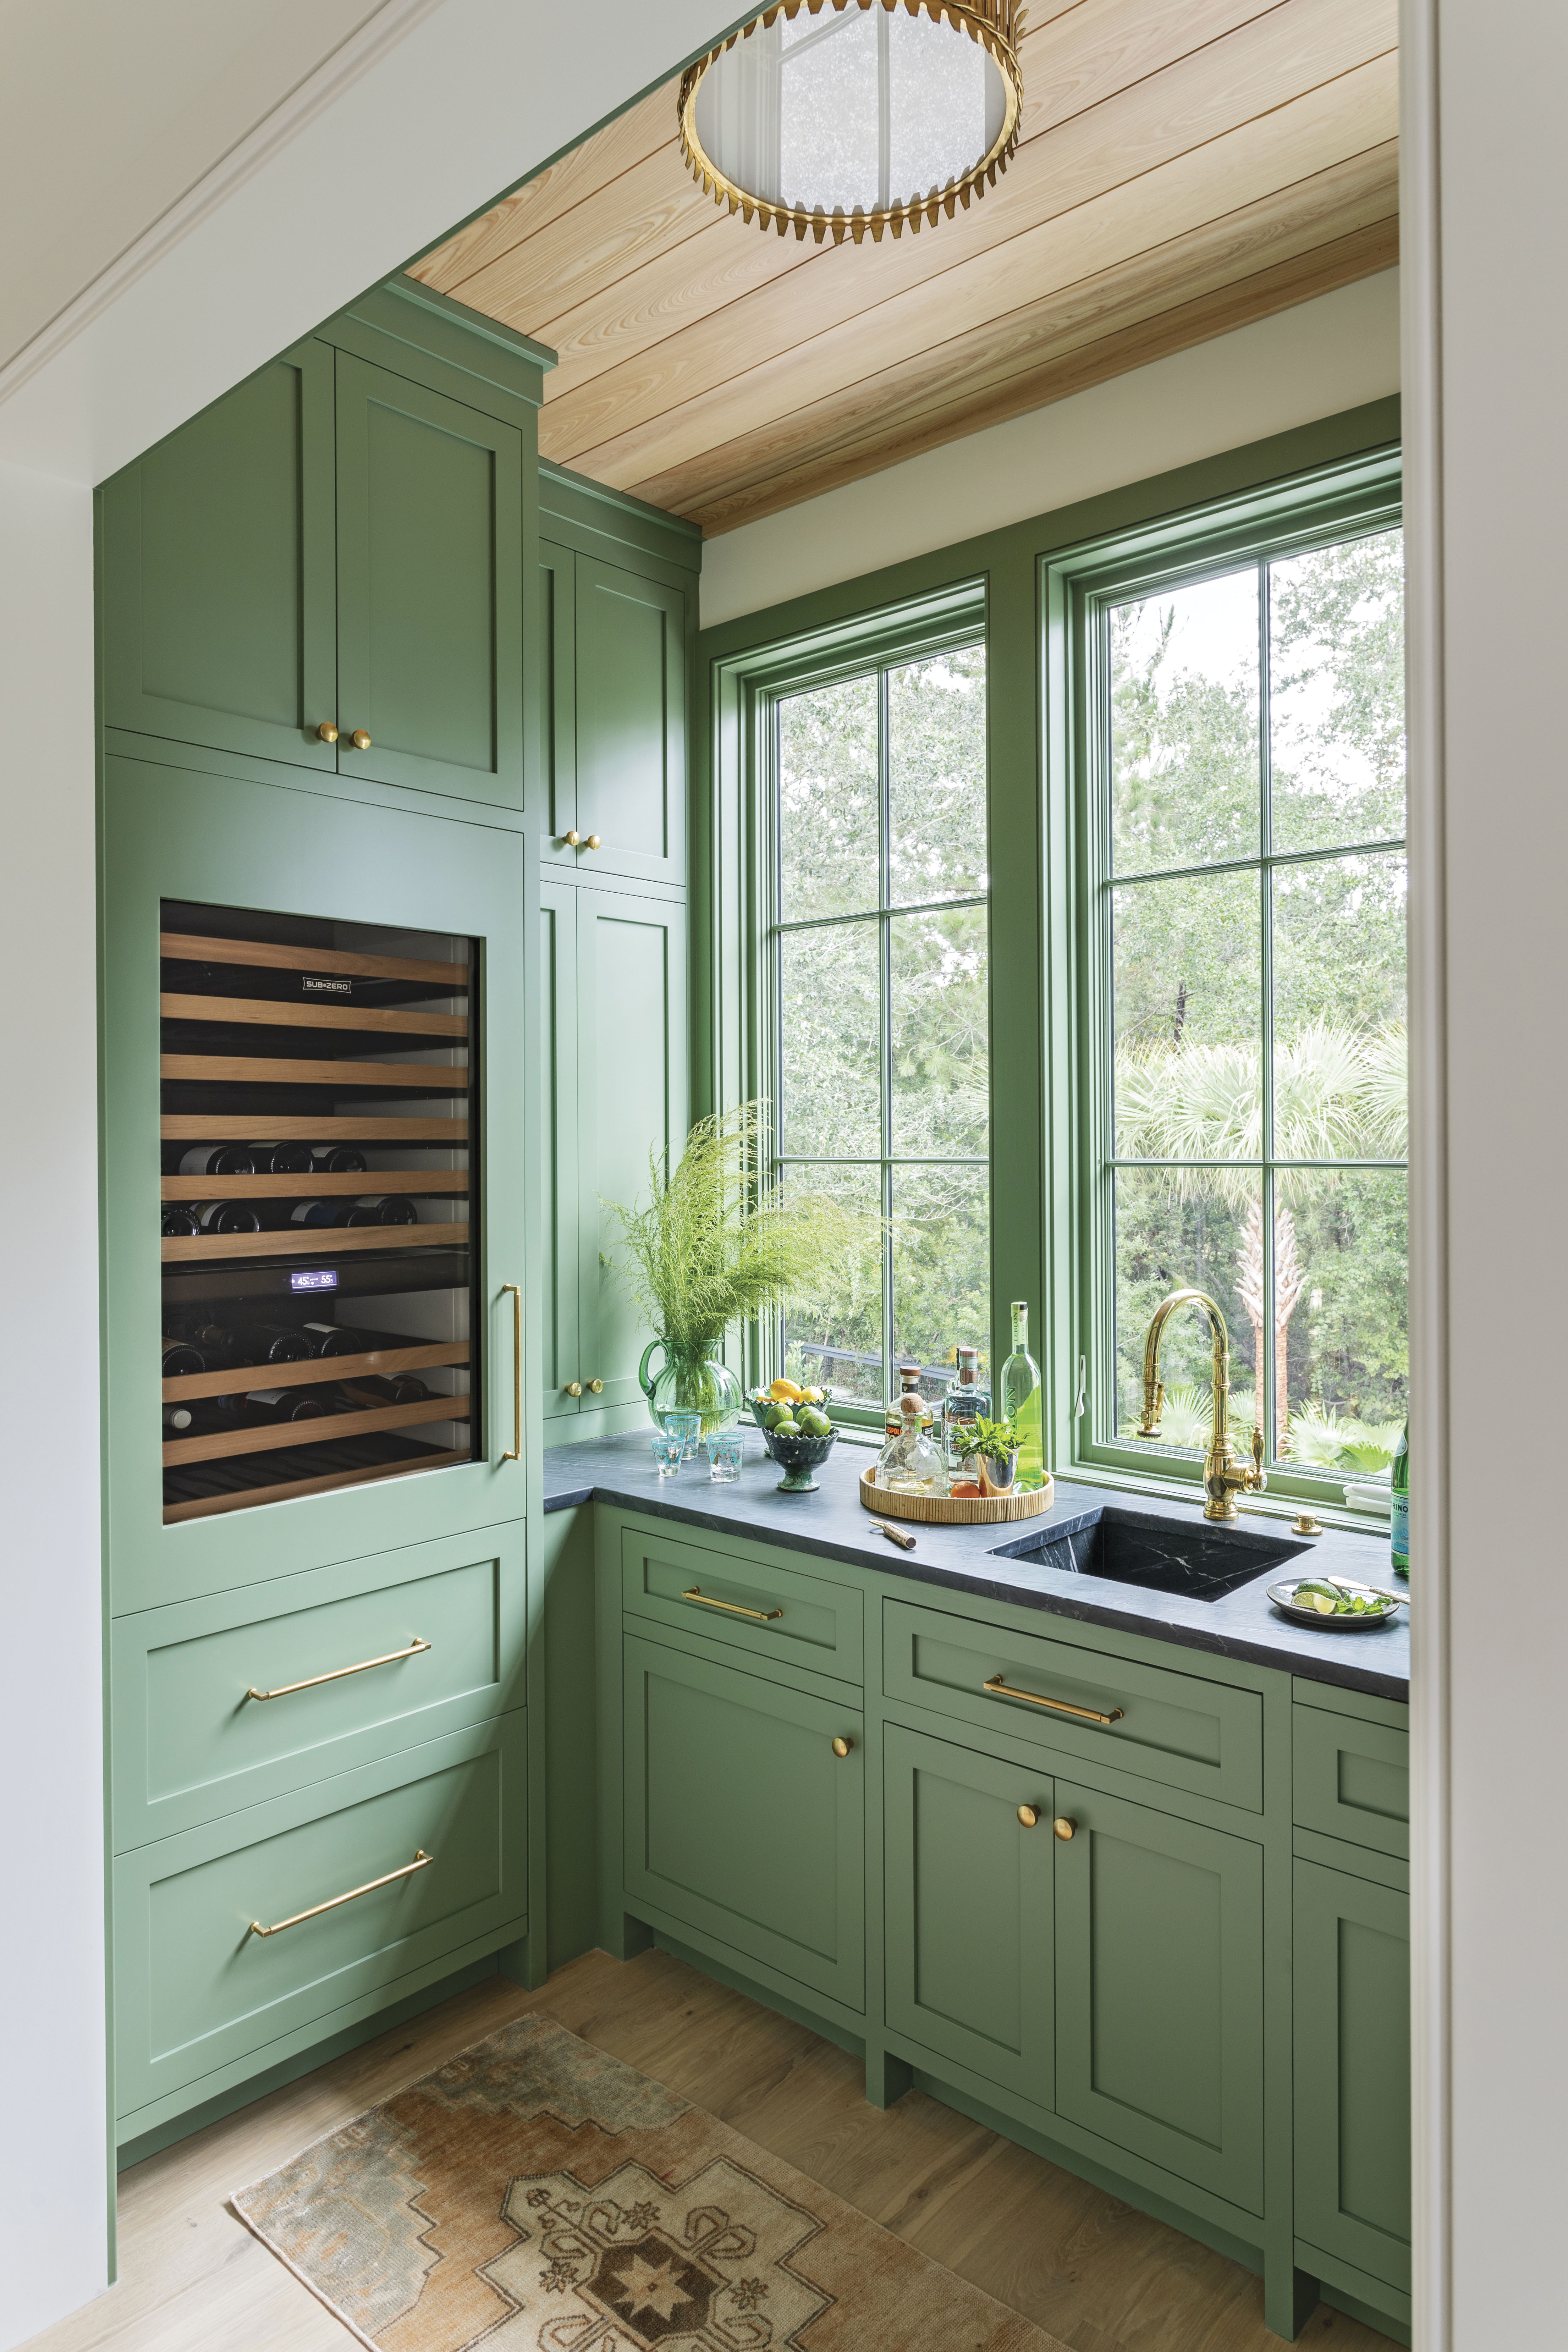 Sage Design: The nearby butler’s pantry, painted in Farrow &amp; Ball “Calke Green,” serves up extra prep space, ample storage, and showstopping looks. “[It] might be my favorite pantry ever,” says Elebash.